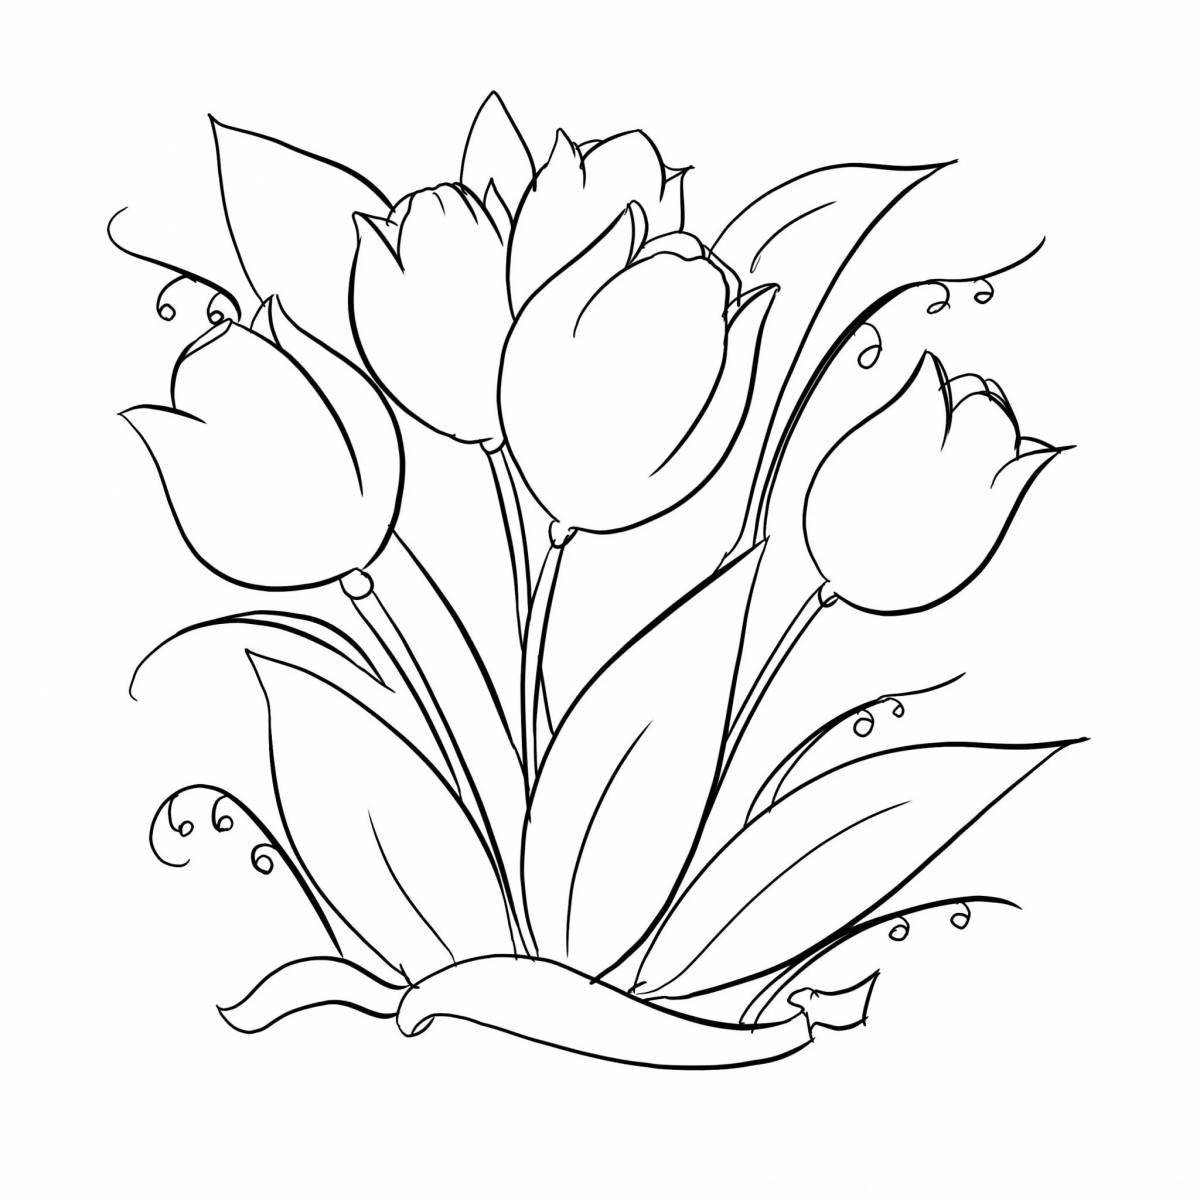 Glowing tulip coloring book for kids